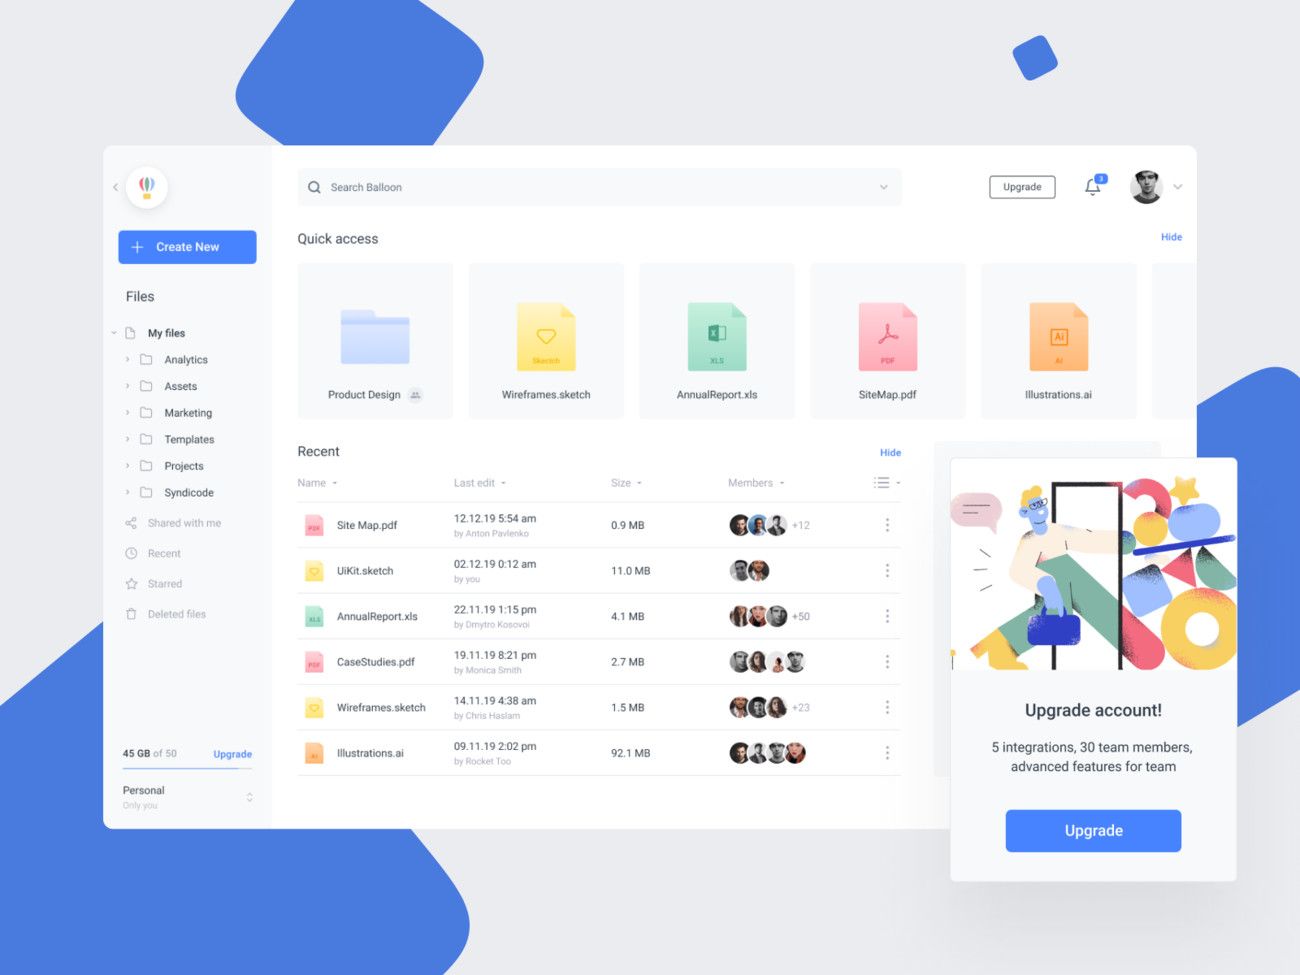 Any employee won't waste their time on searching no more (*image by [Anton](https://dribbble.com/antonpavlenko){ rel="nofollow" .default-md}*)